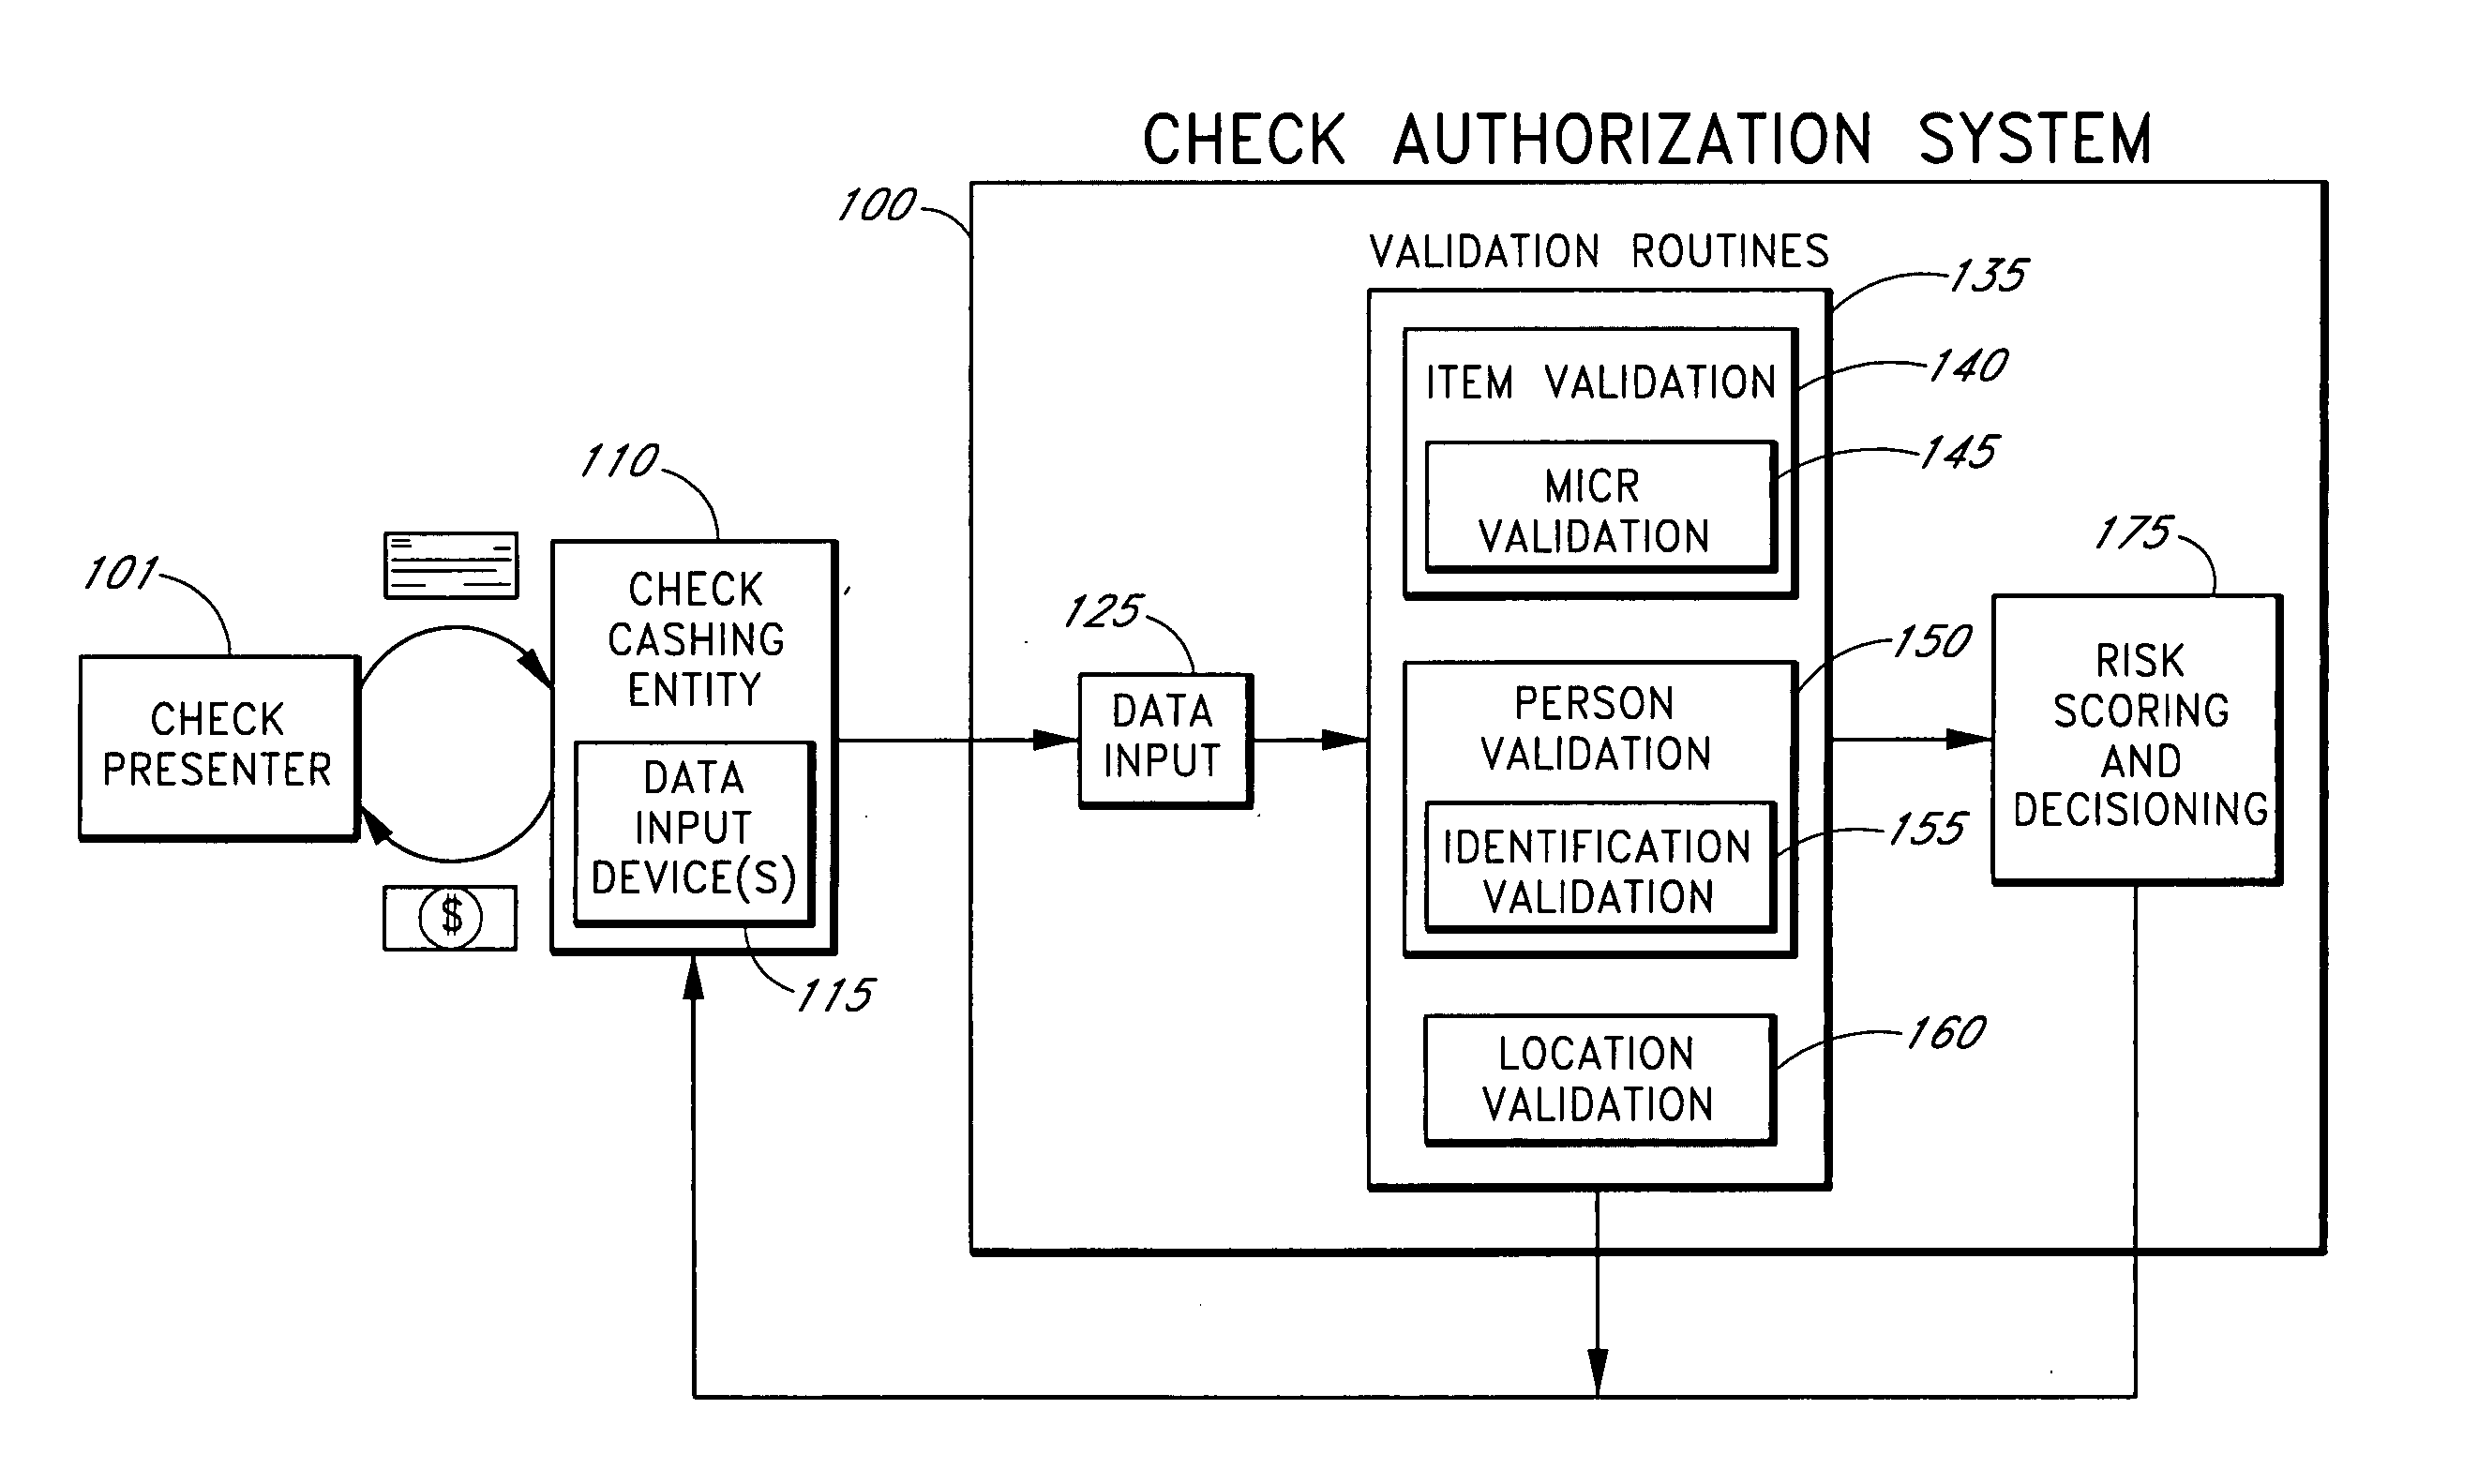 Systems and methods for assessing the risk of financial transaction using geographic-related information